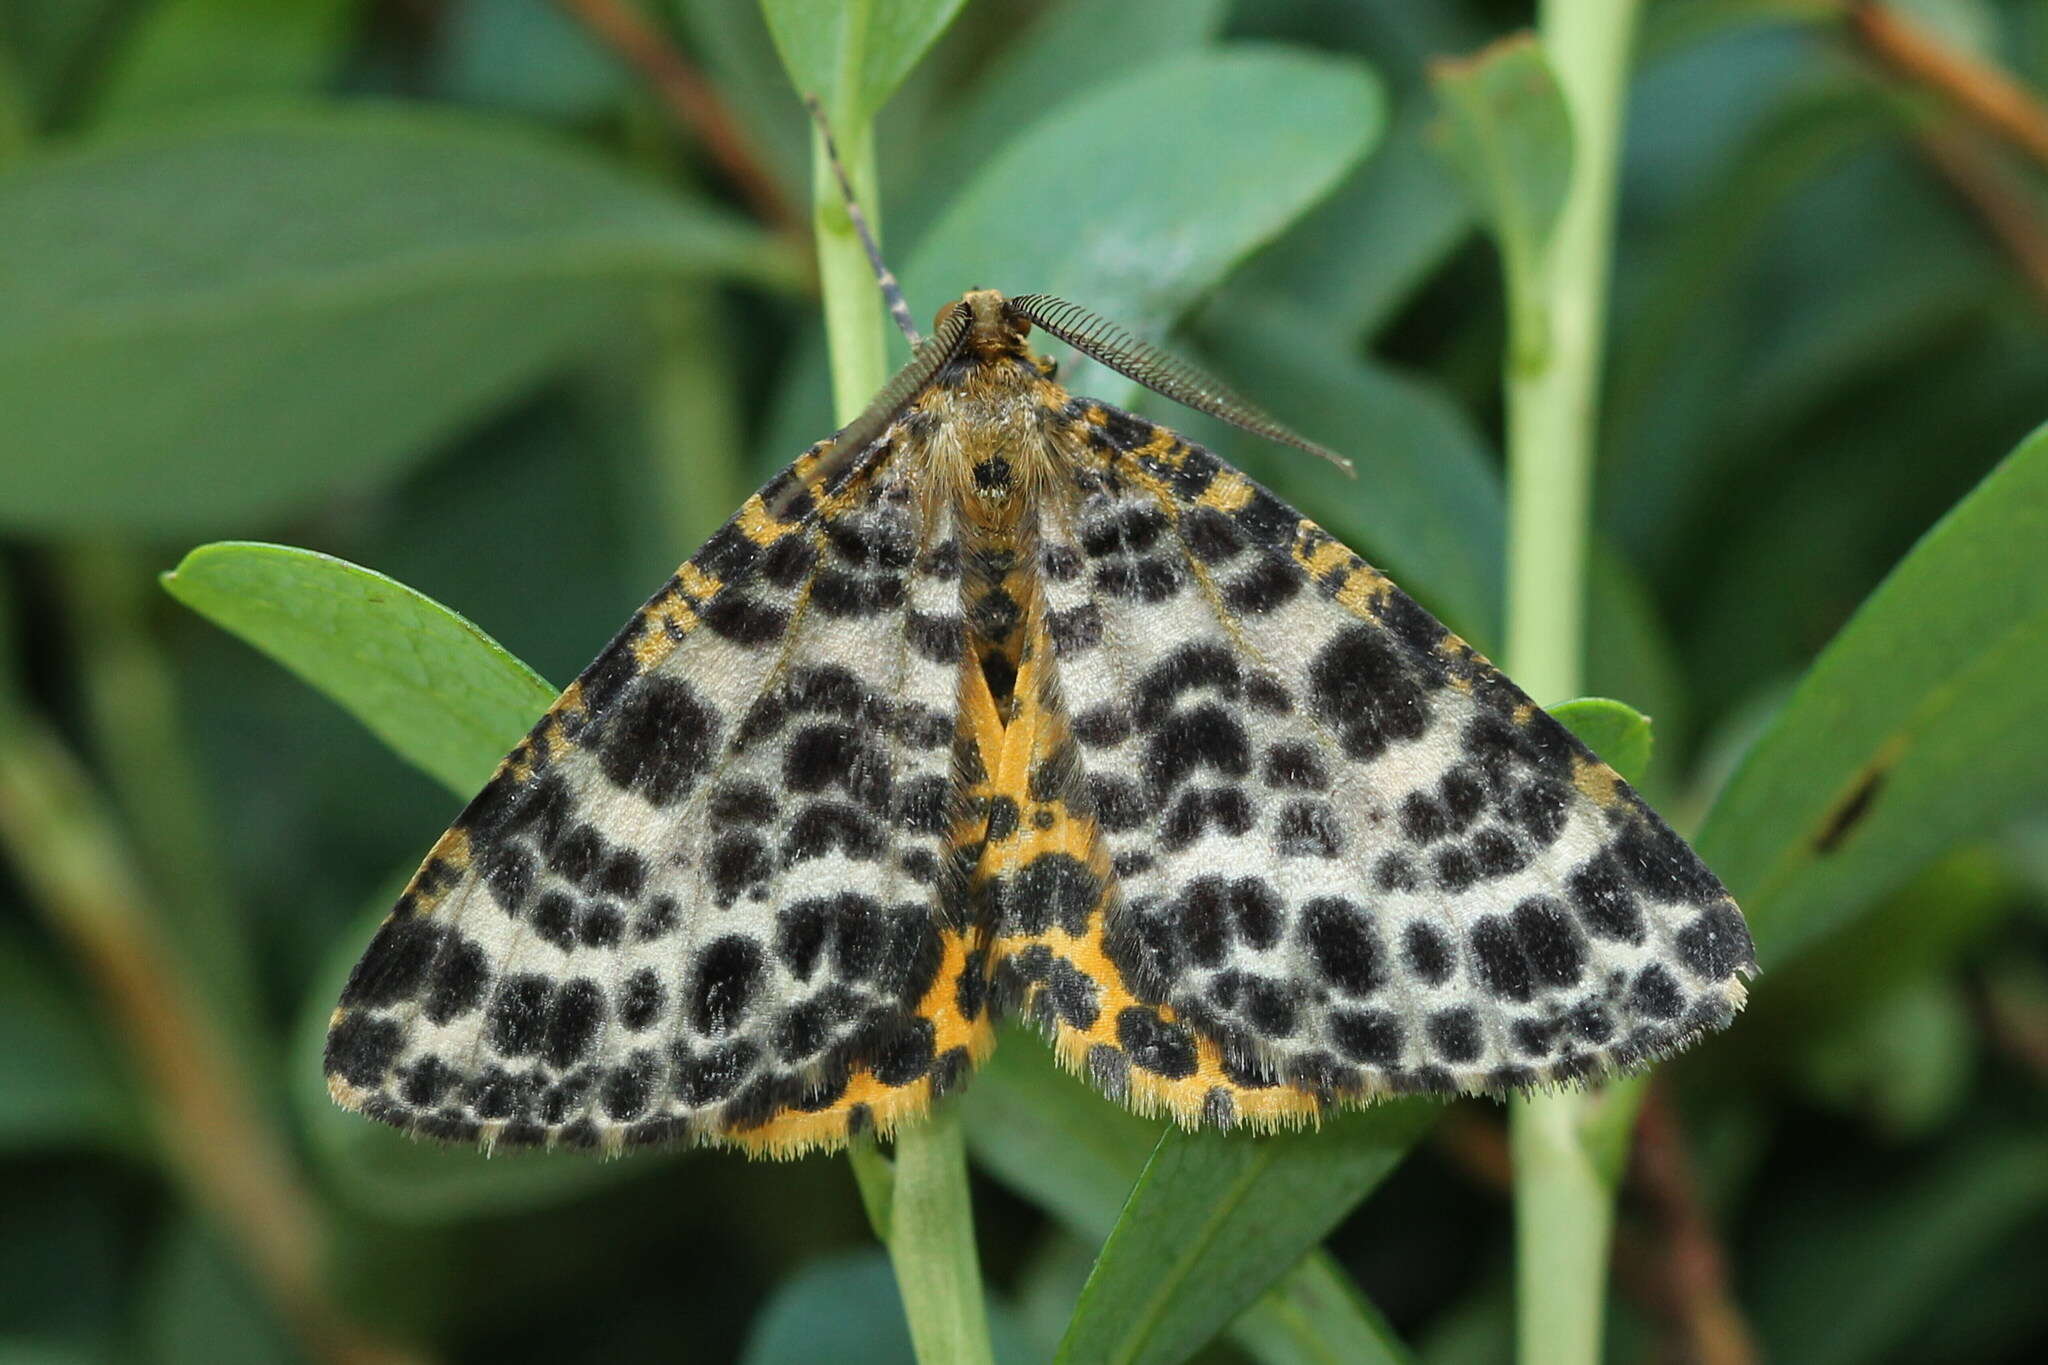 Image of spotted beauty